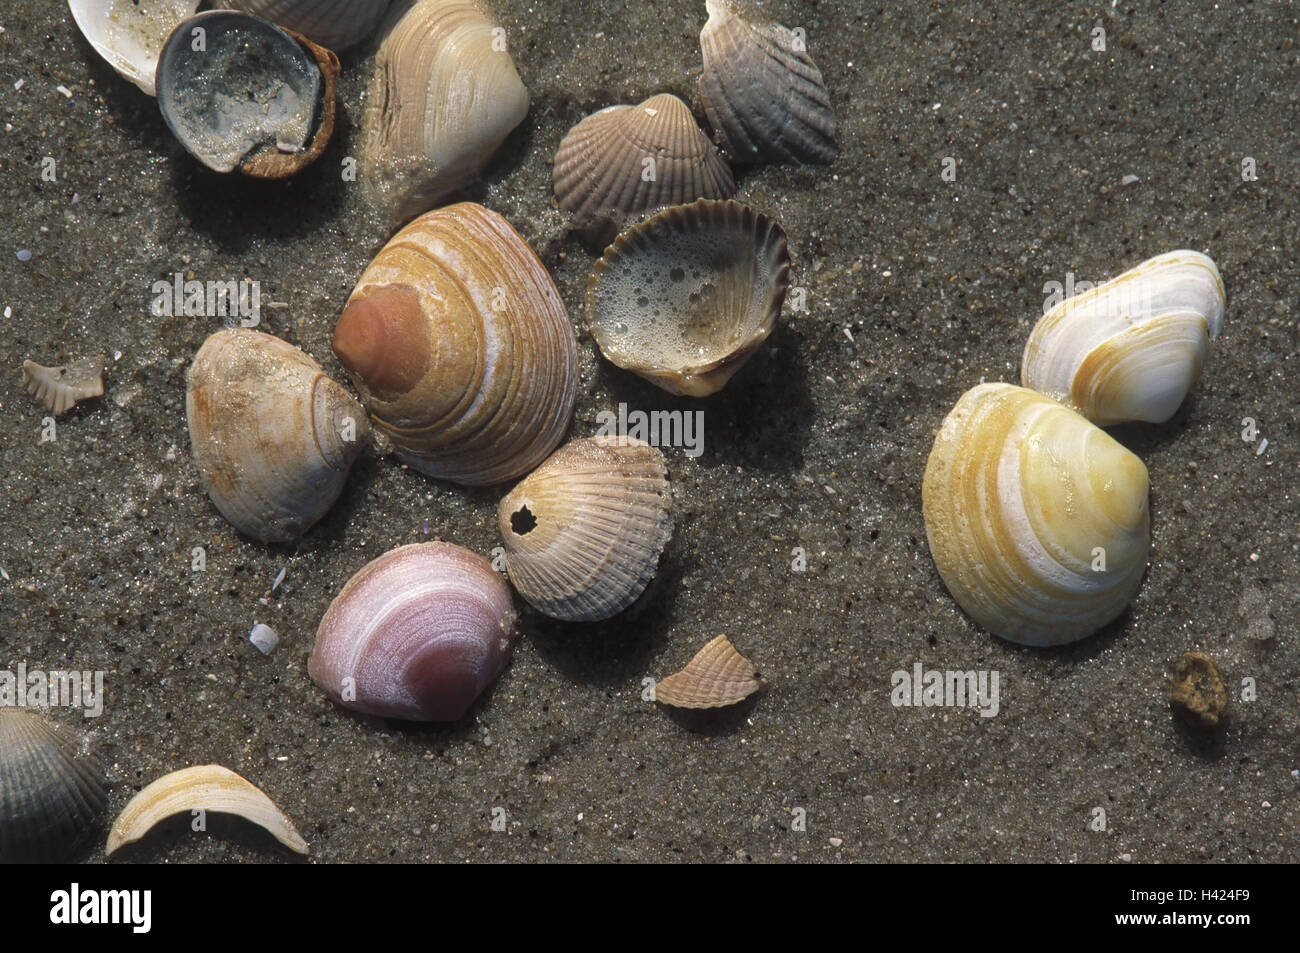 Sandy beach, Sand, cockles, flat mussels, Germany, north frieze country, island, Amrum, mussels, different, Cardium edule, Macoma baltica, Still life, product photography Stock Photo